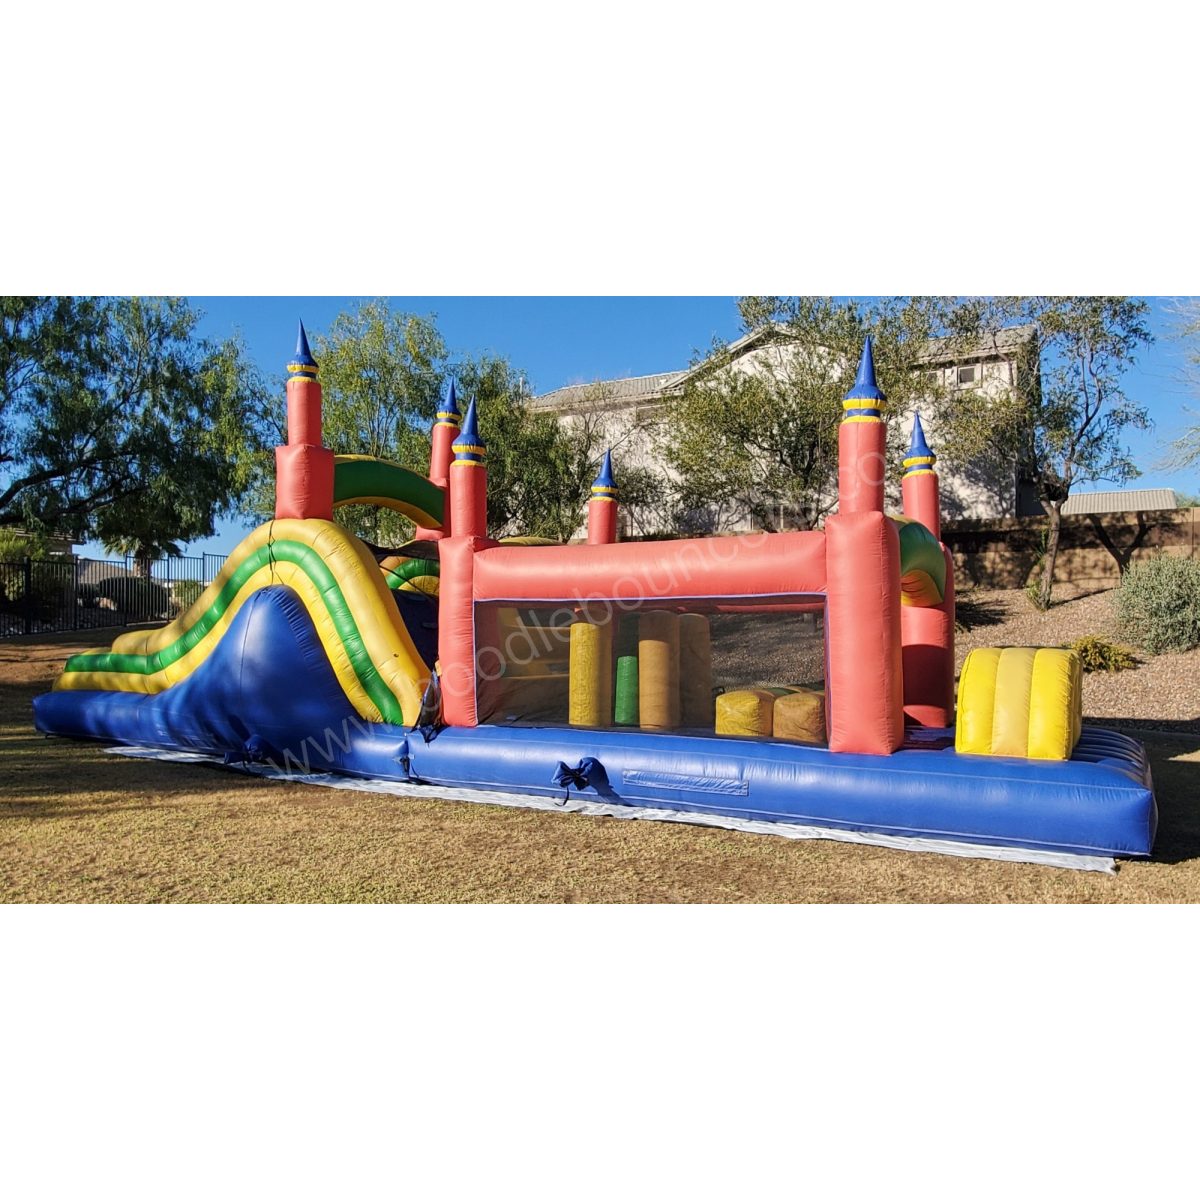 45 Foot Obstacle Course